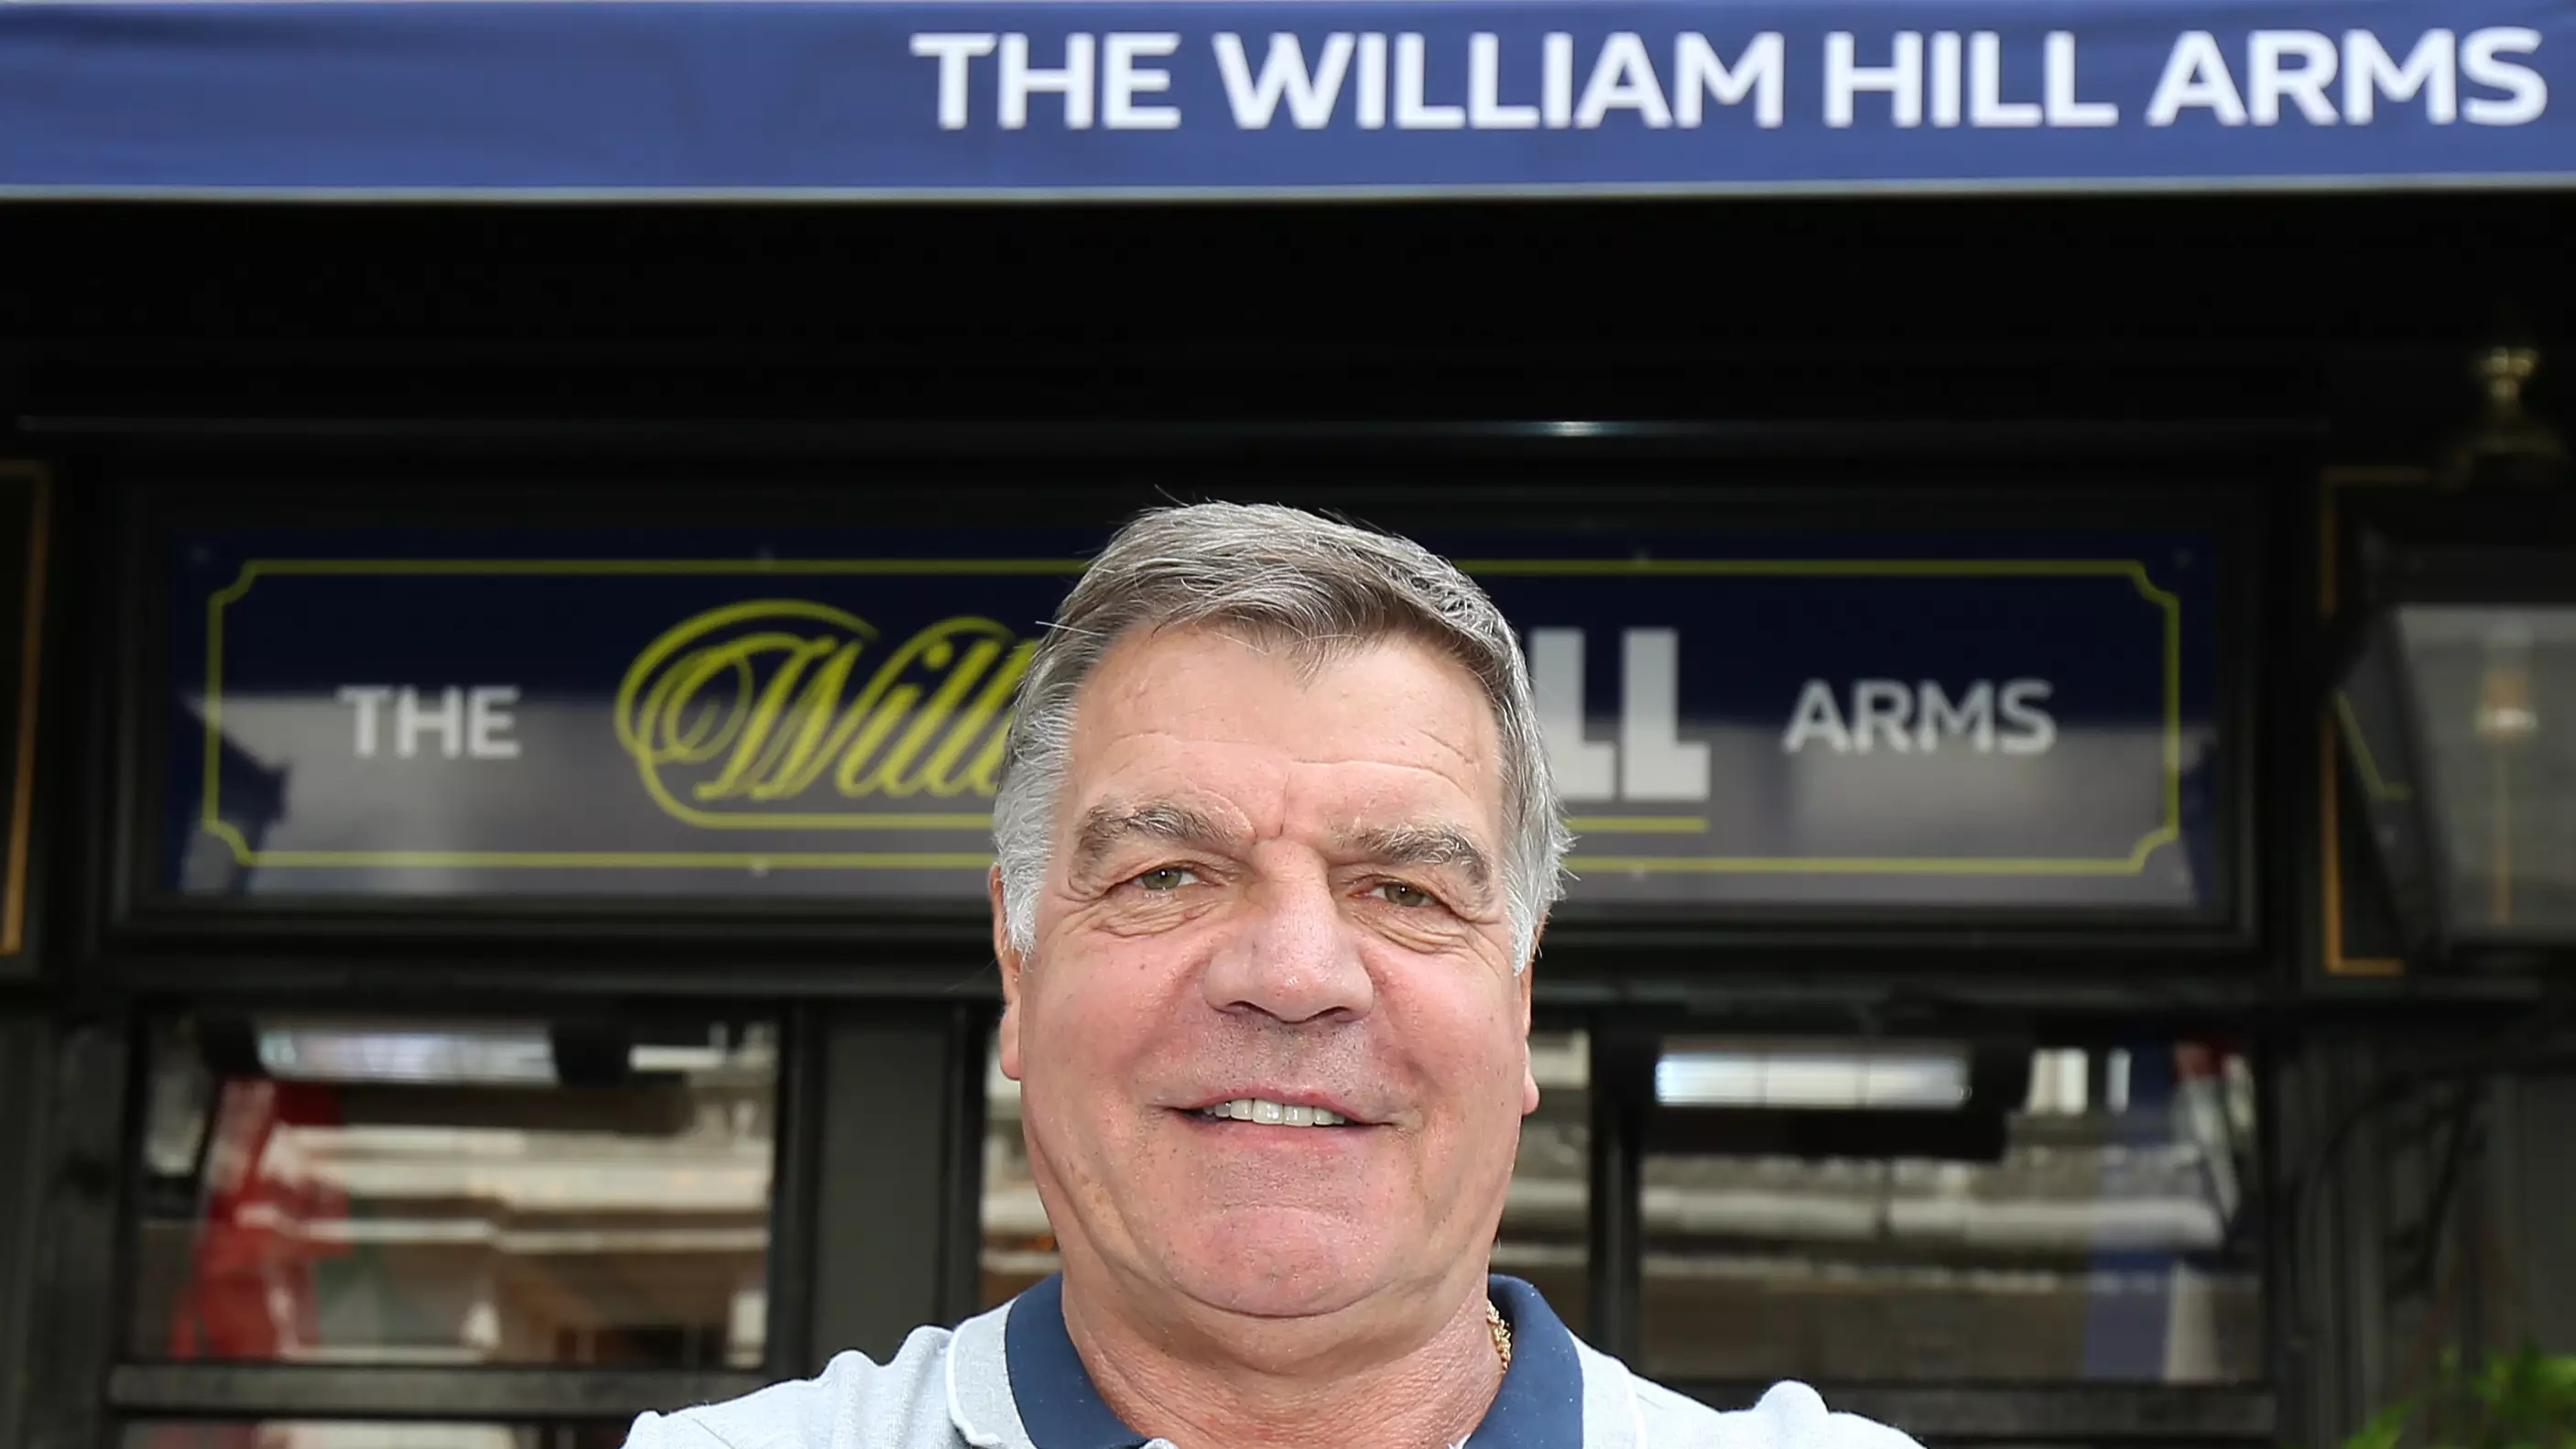 Sam Allardyce Was Spotted Eating A Burger In A Pub While Watching England Game